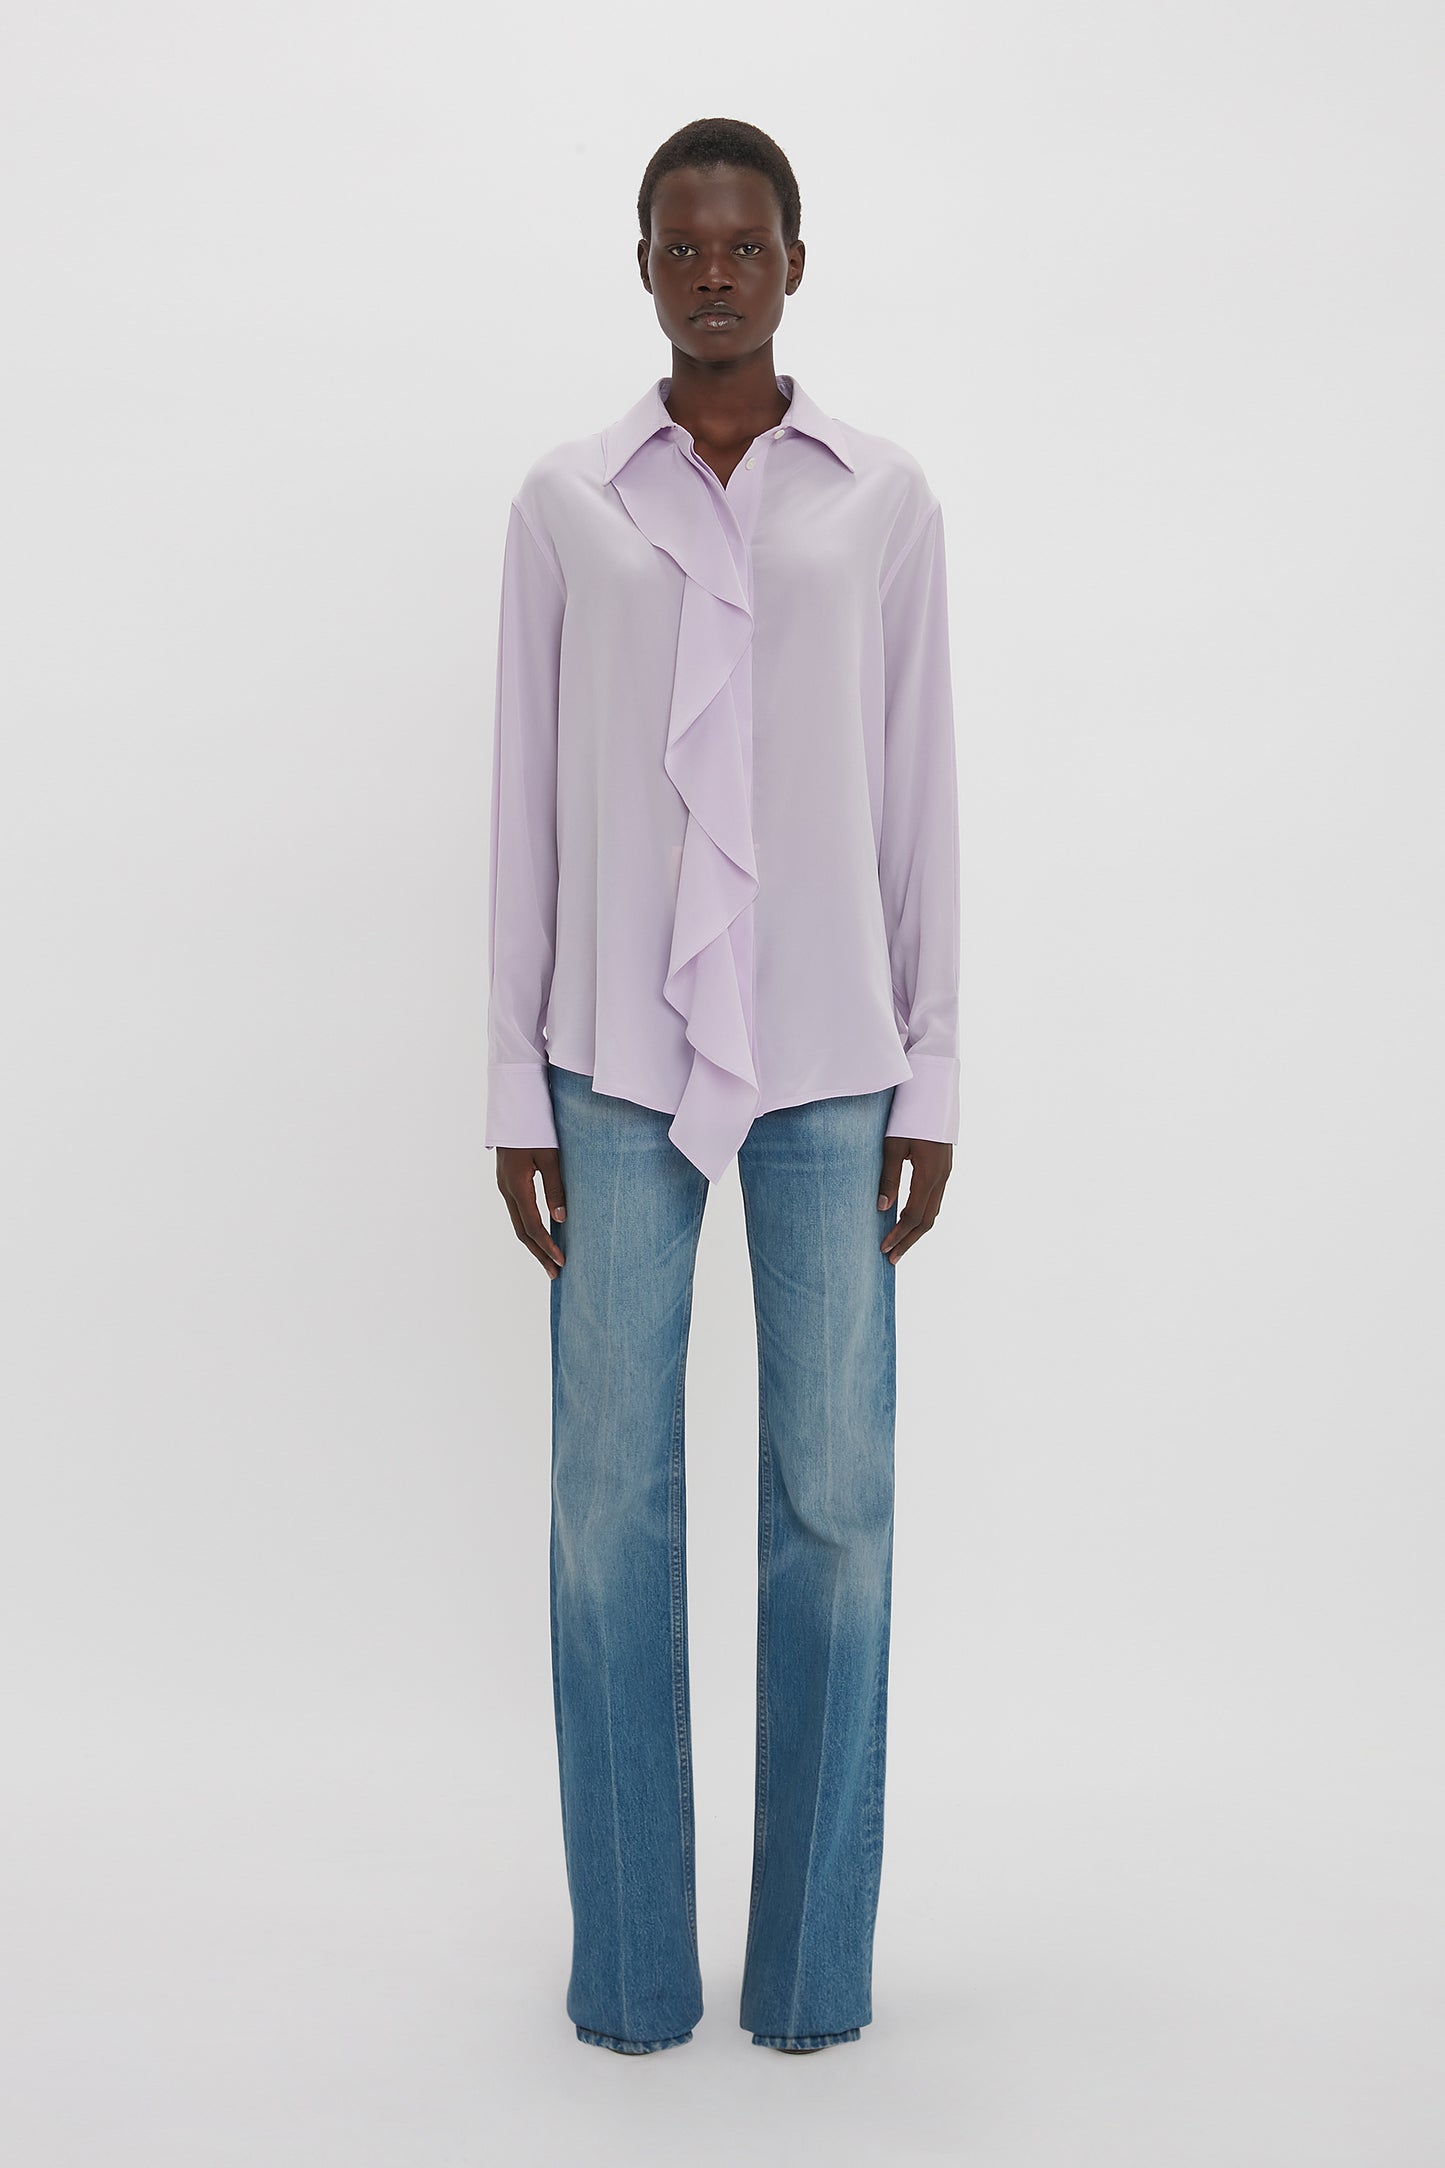 Person wearing an ethereal shade of Victoria Beckham Asymmetric Ruffle Blouse In Petunia paired with wide-leg blue jeans, standing against a plain white background.